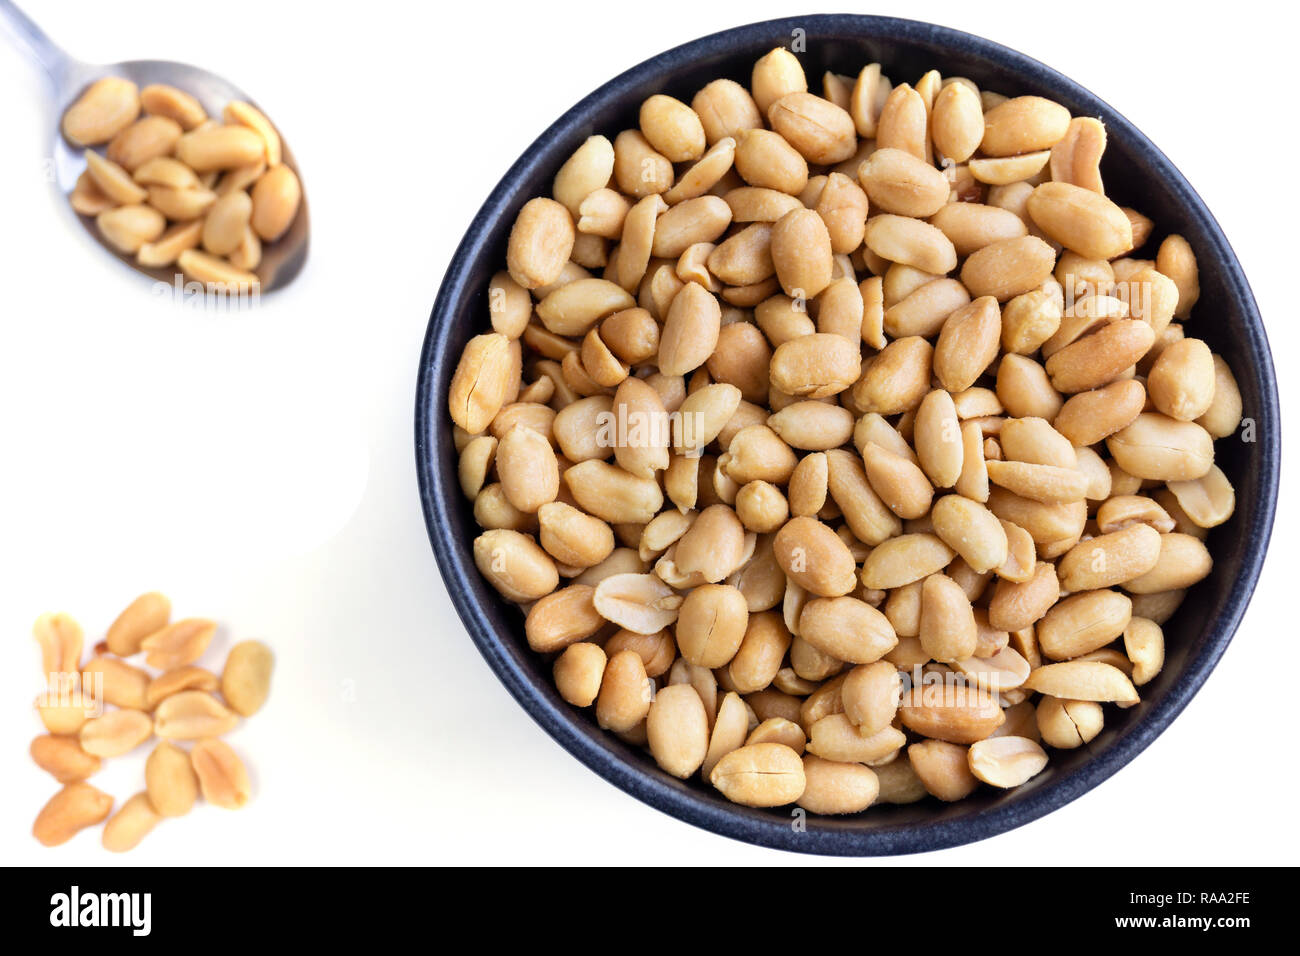 Ground Nuts In A Blender. Healthy Food Concept Stock Photo, Picture and  Royalty Free Image. Image 89930944.